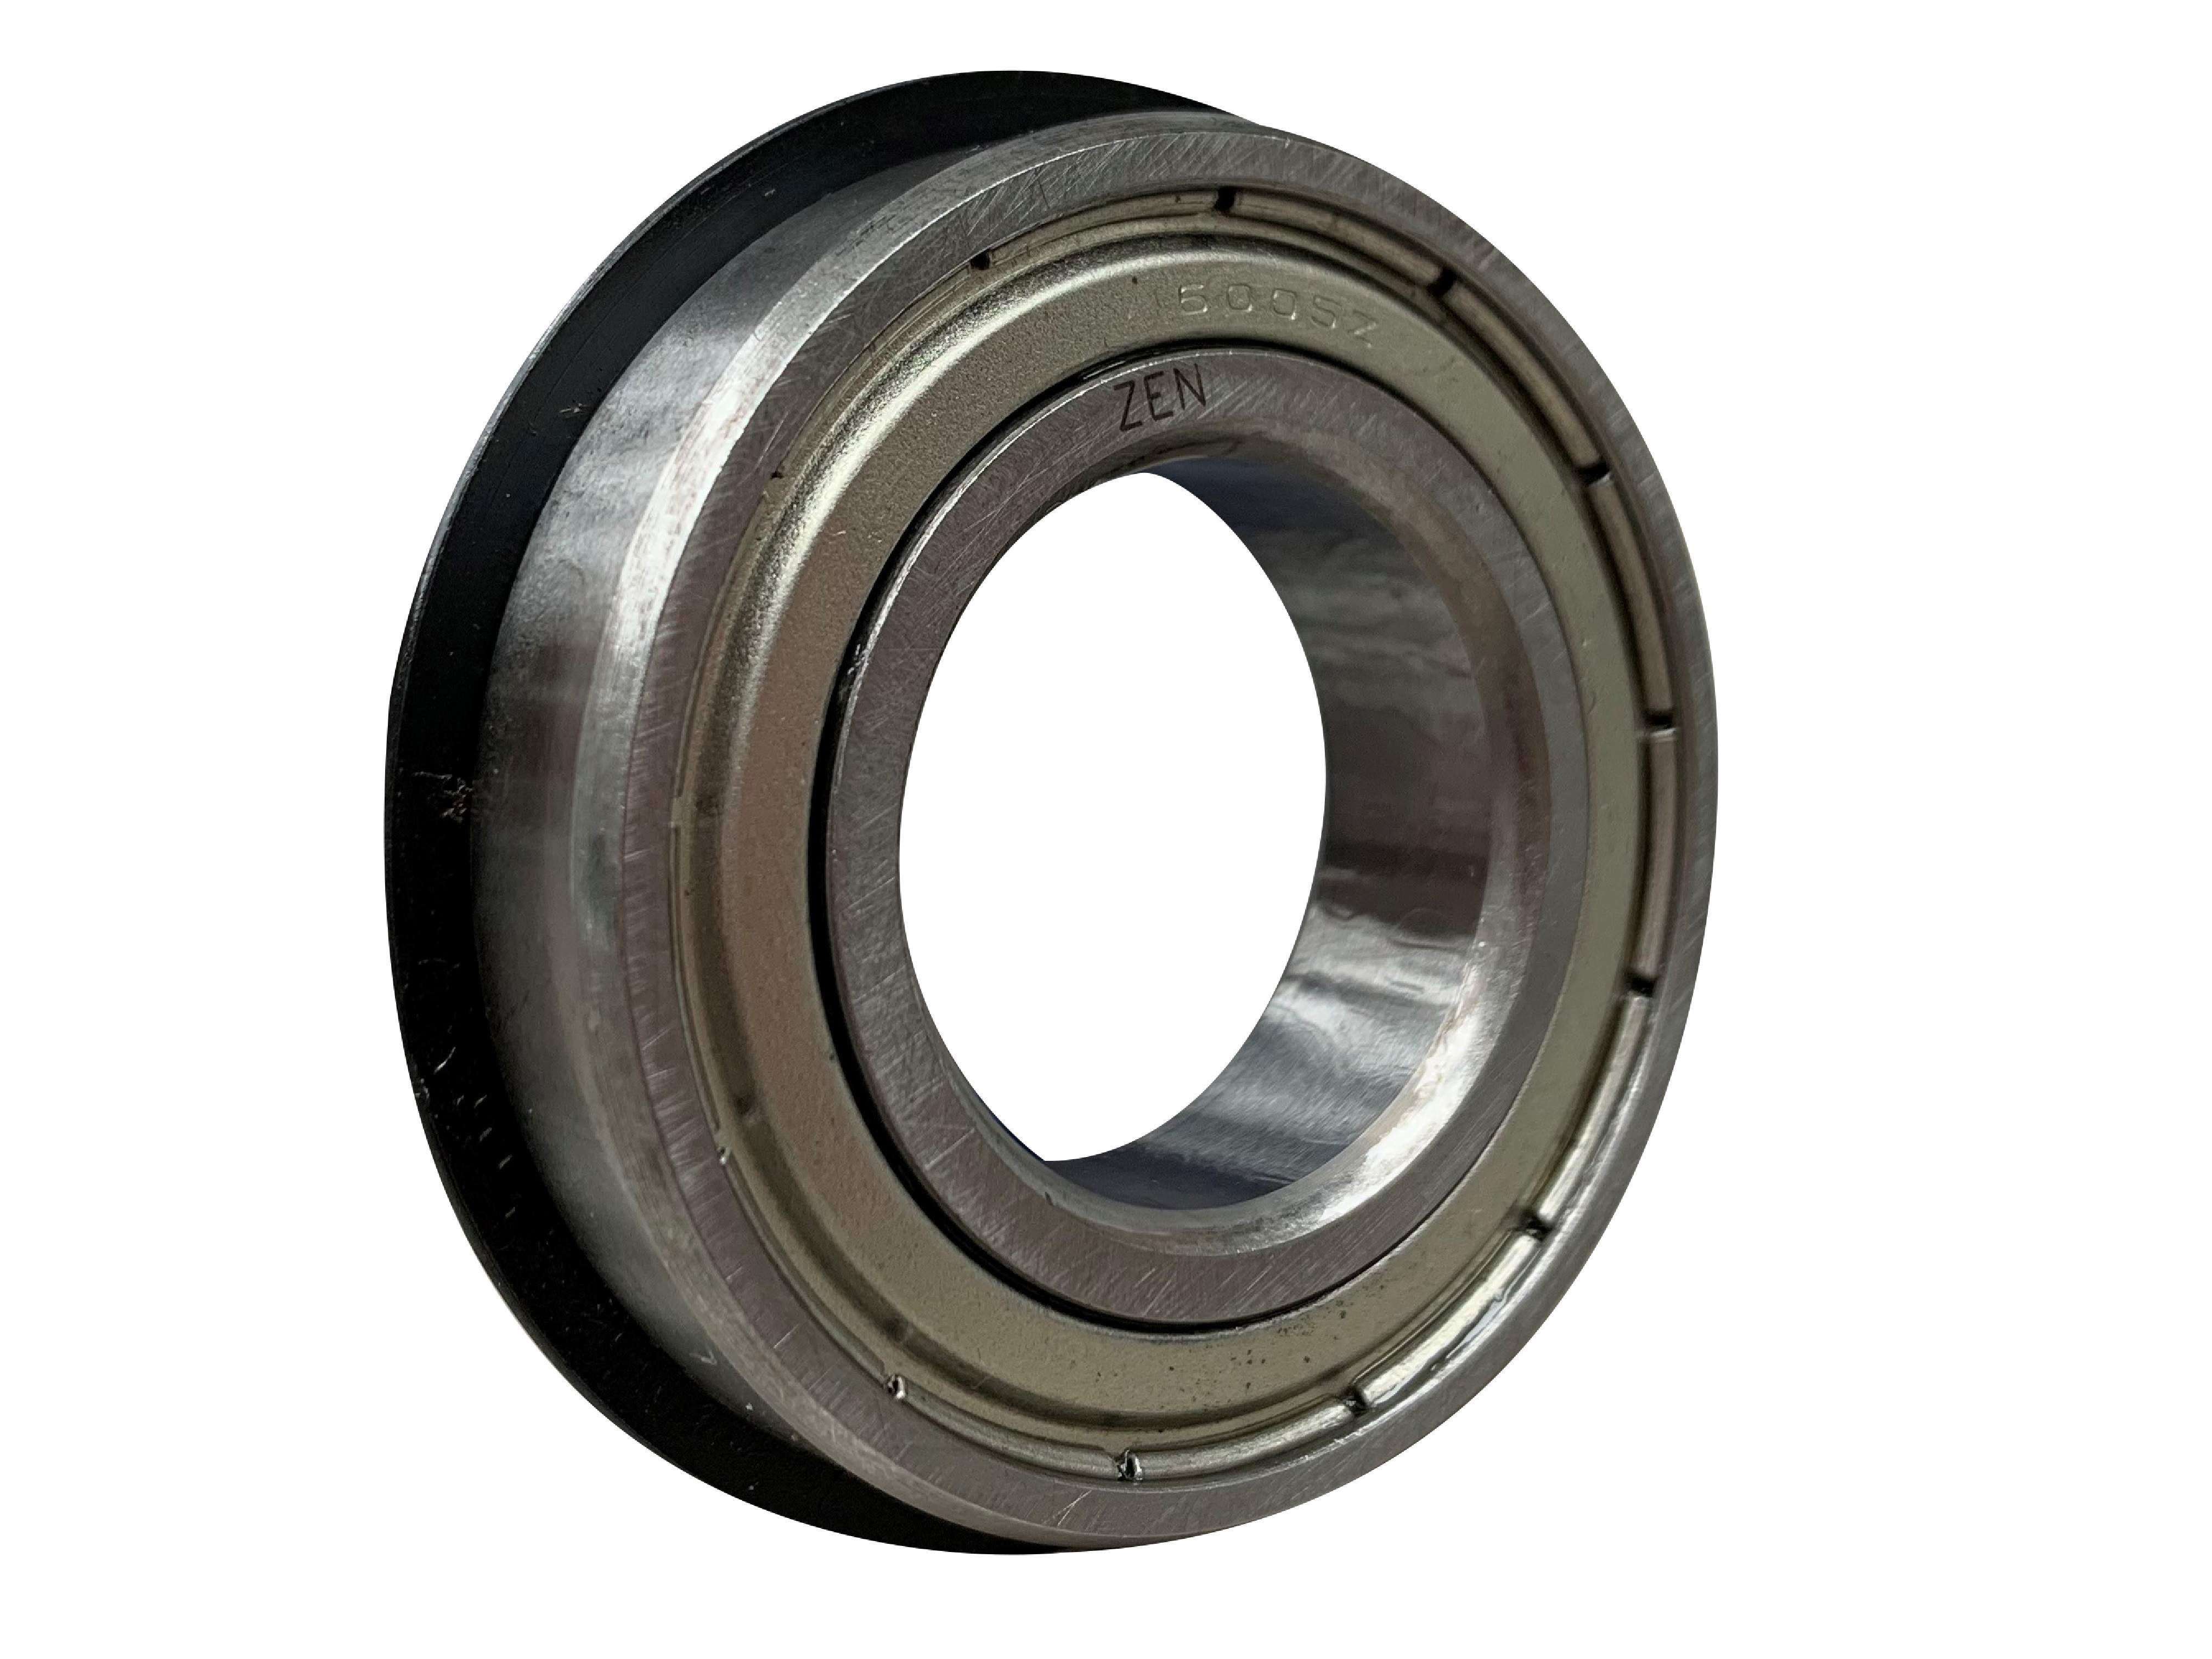 ZEN 6005-2Z-NR Shielded Ball Bearing With Snap Ring 25mm x 47mm x 12mm